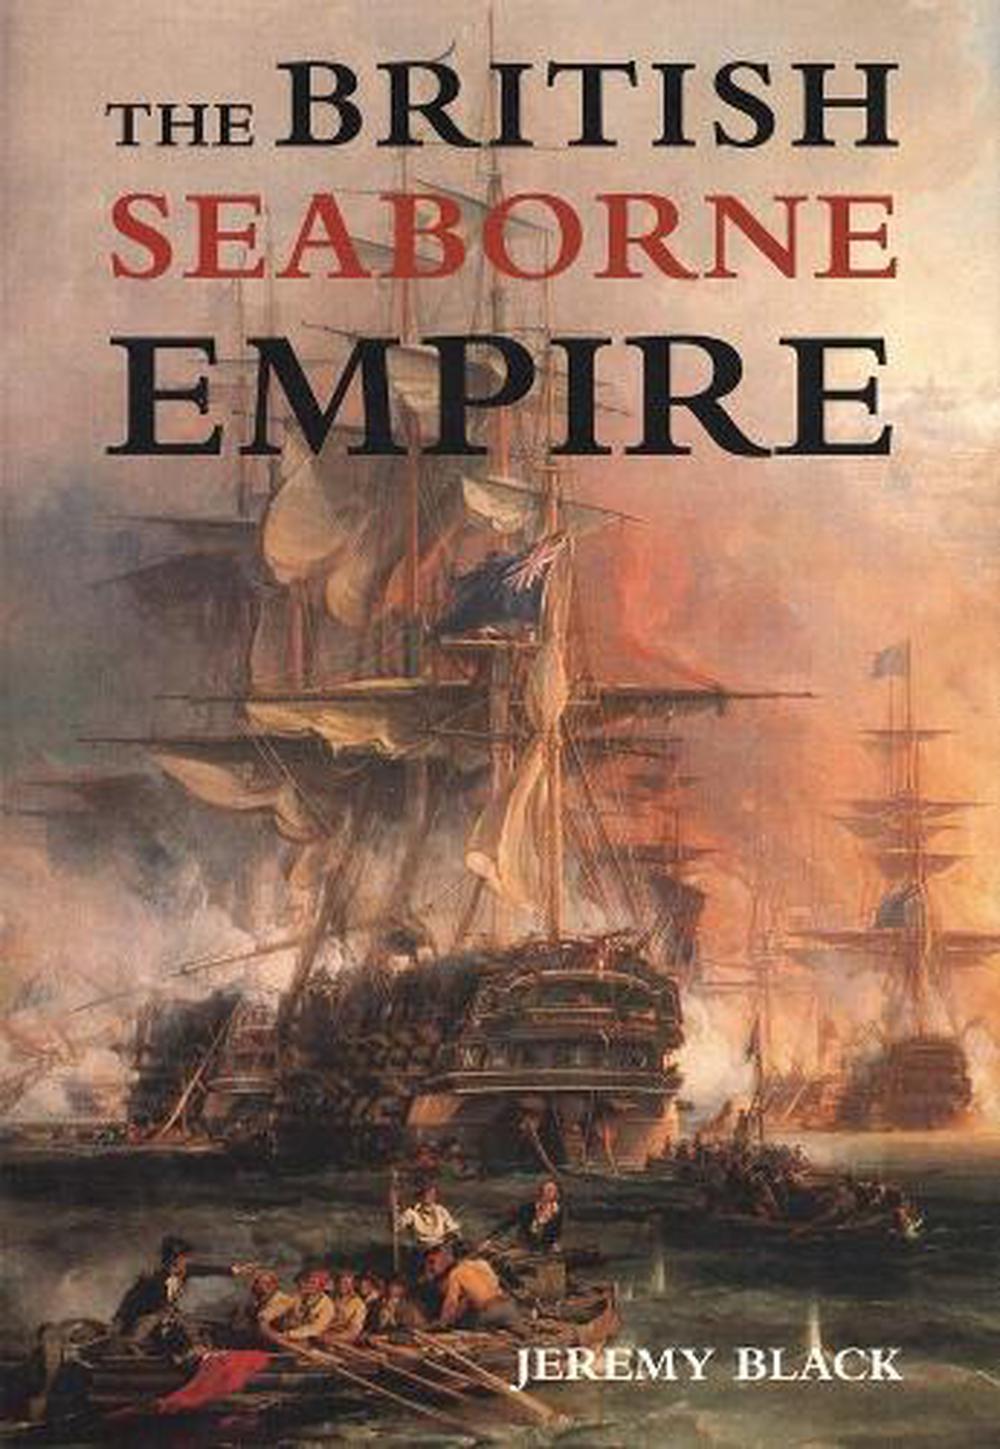 The British Seaborne Empire by Jeremy Black (English) Hardcover Book ...